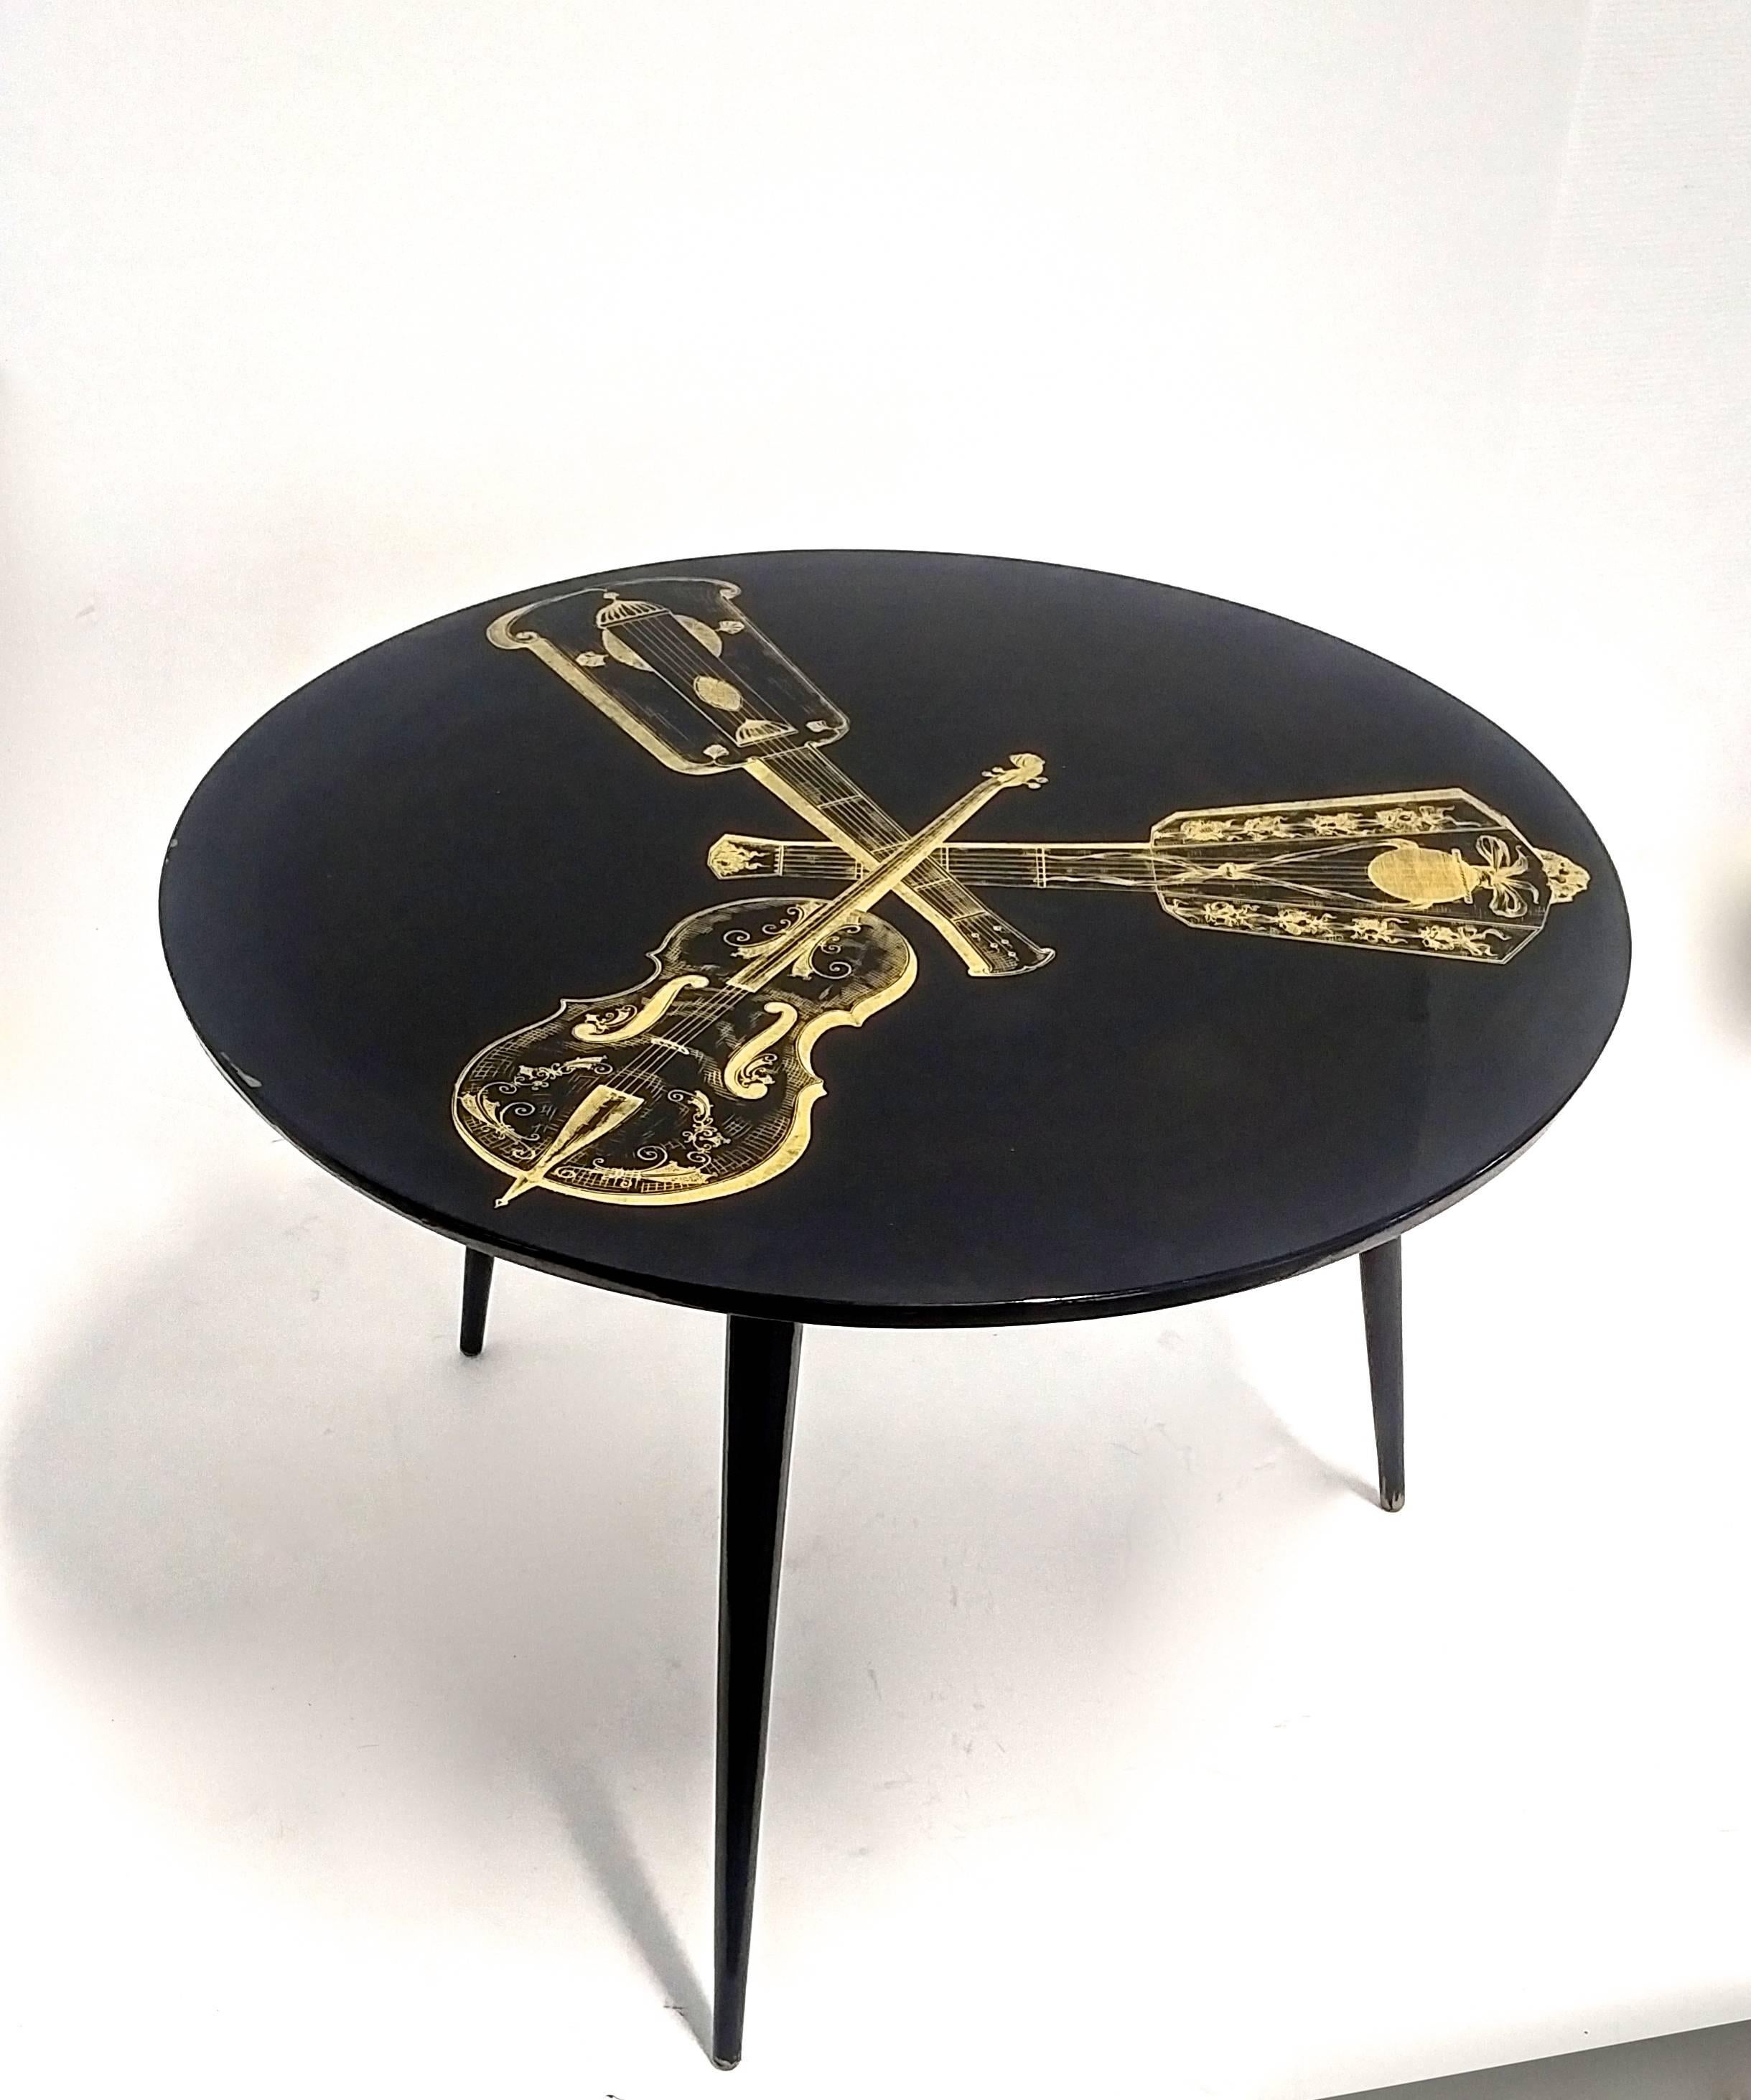 Decorative Italian Mid-Century side or cocktail table with black lacquer top and gold painting of string instruments in the style of Piero Fornasetti.
The legs can be dismounted from the top.